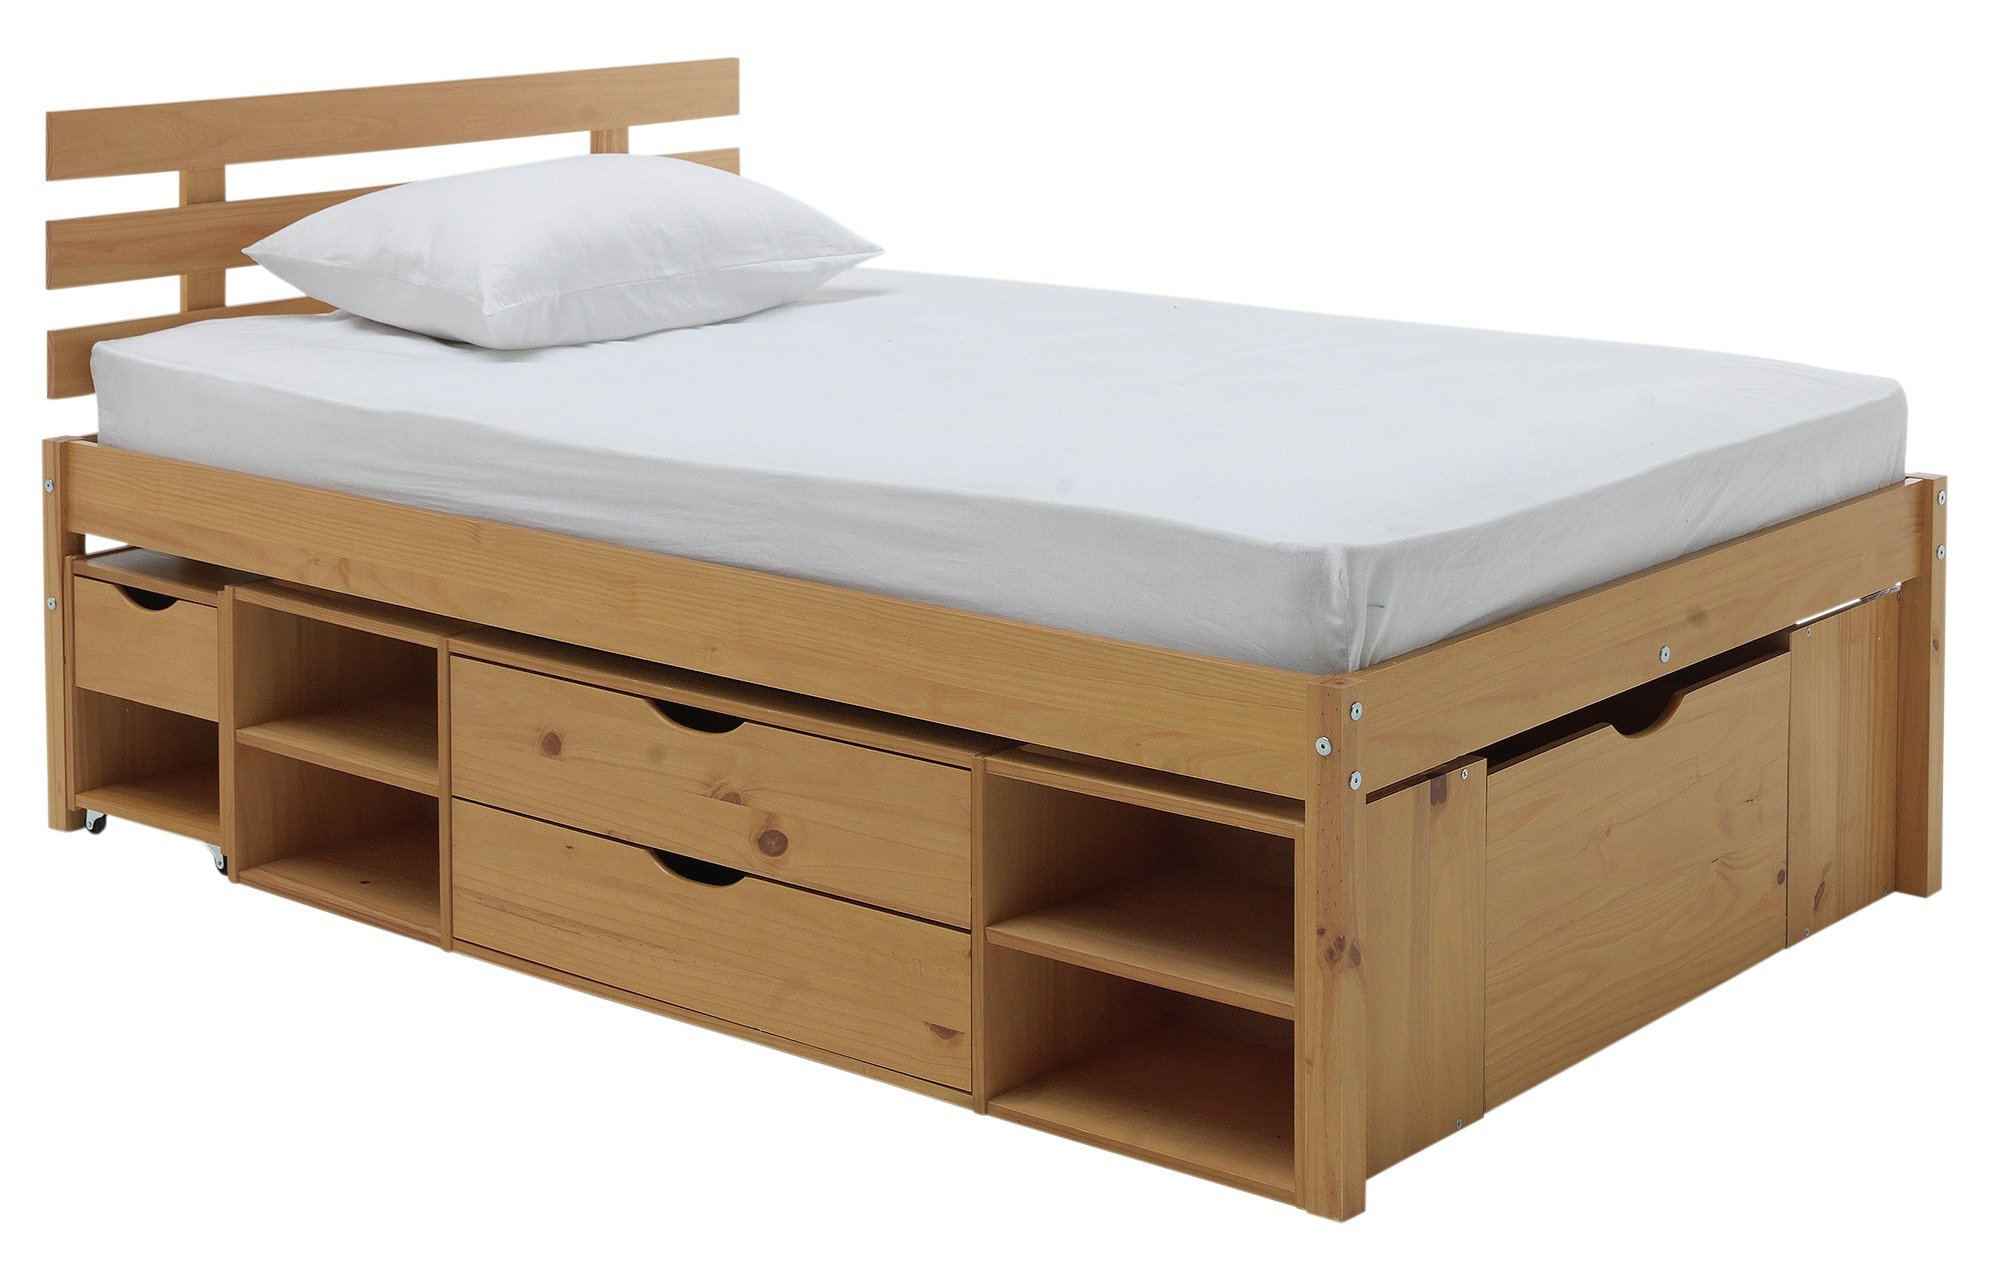 double bed mattress frame